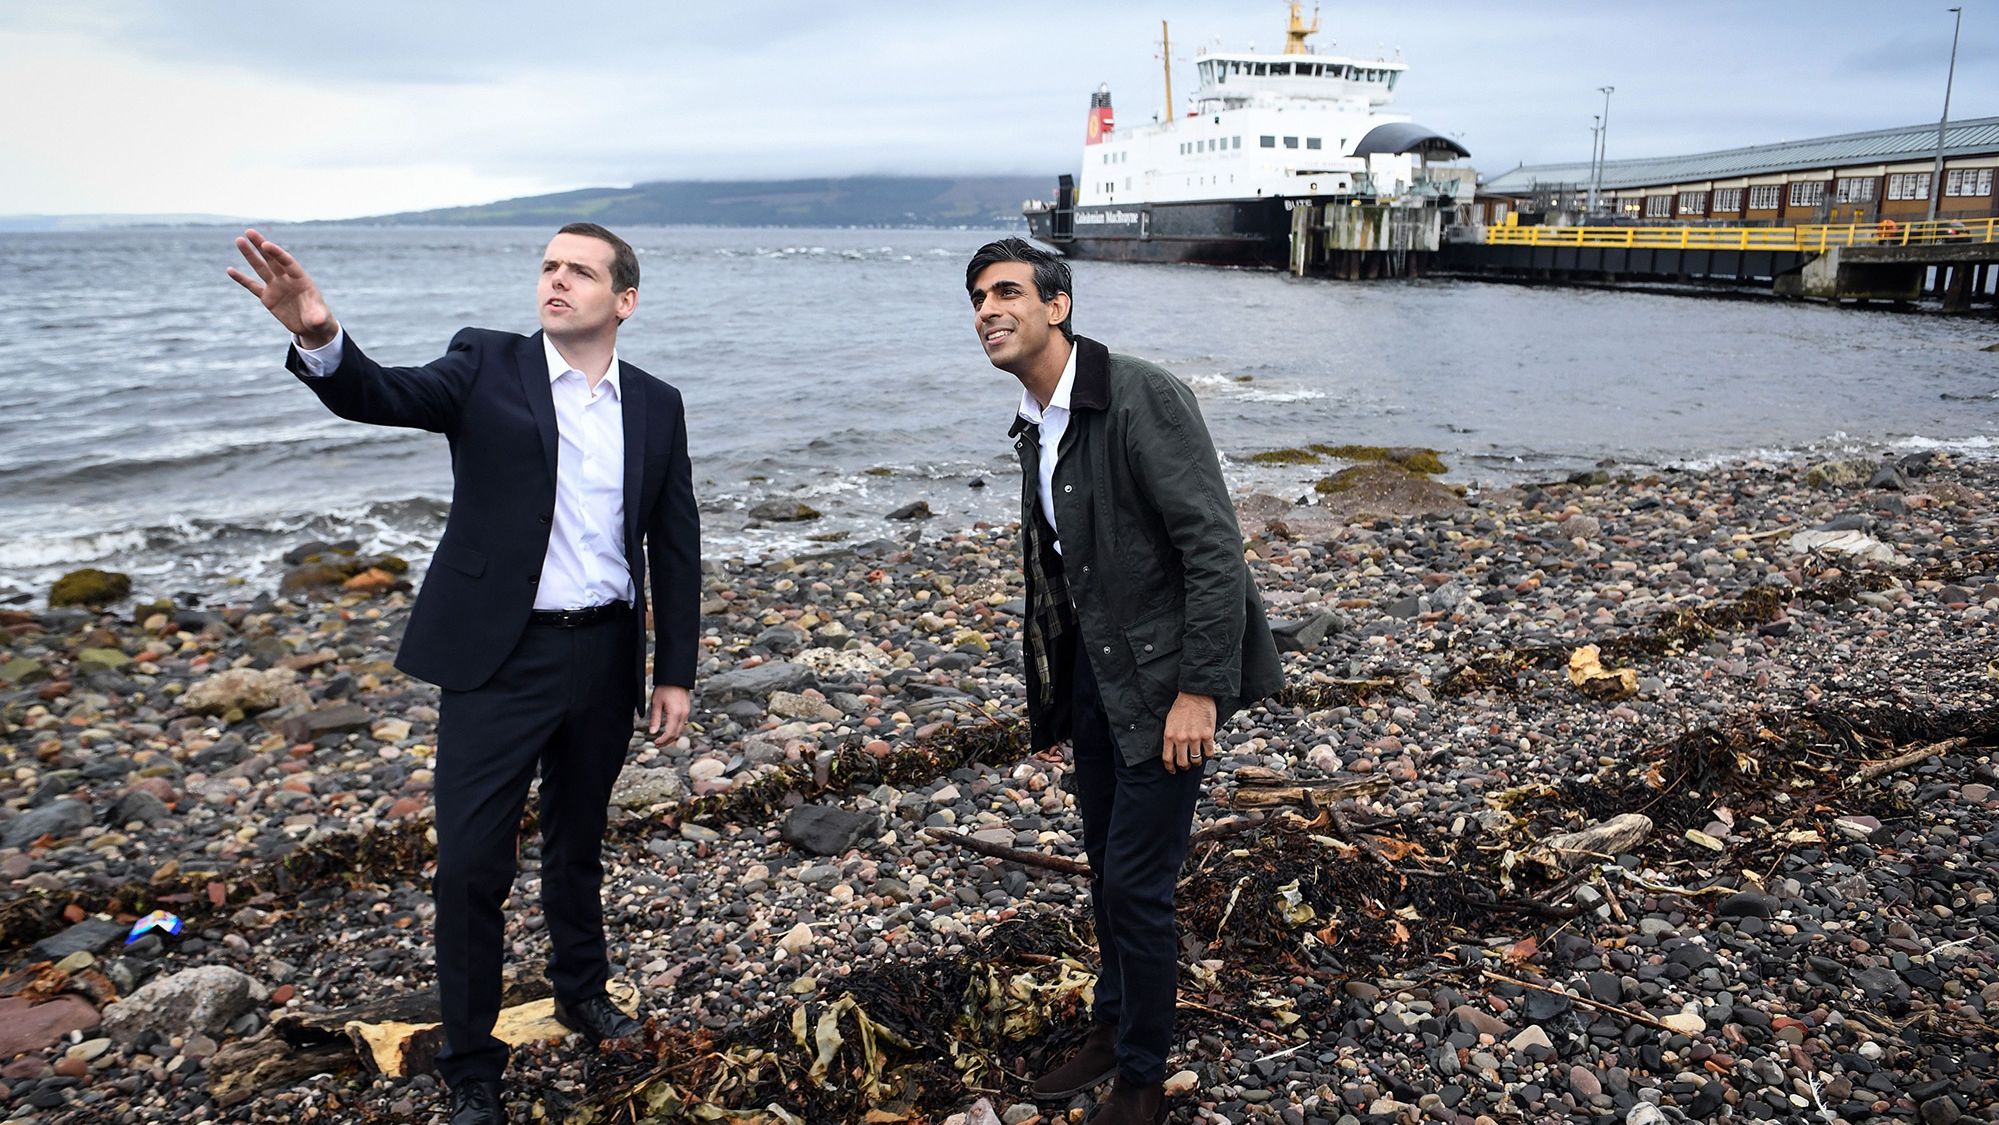 Douglas Ross, leader of the Scottish Conservative Party, meets with Sunak at Wemyss Bay on the west coast of Scotland in August 2020.